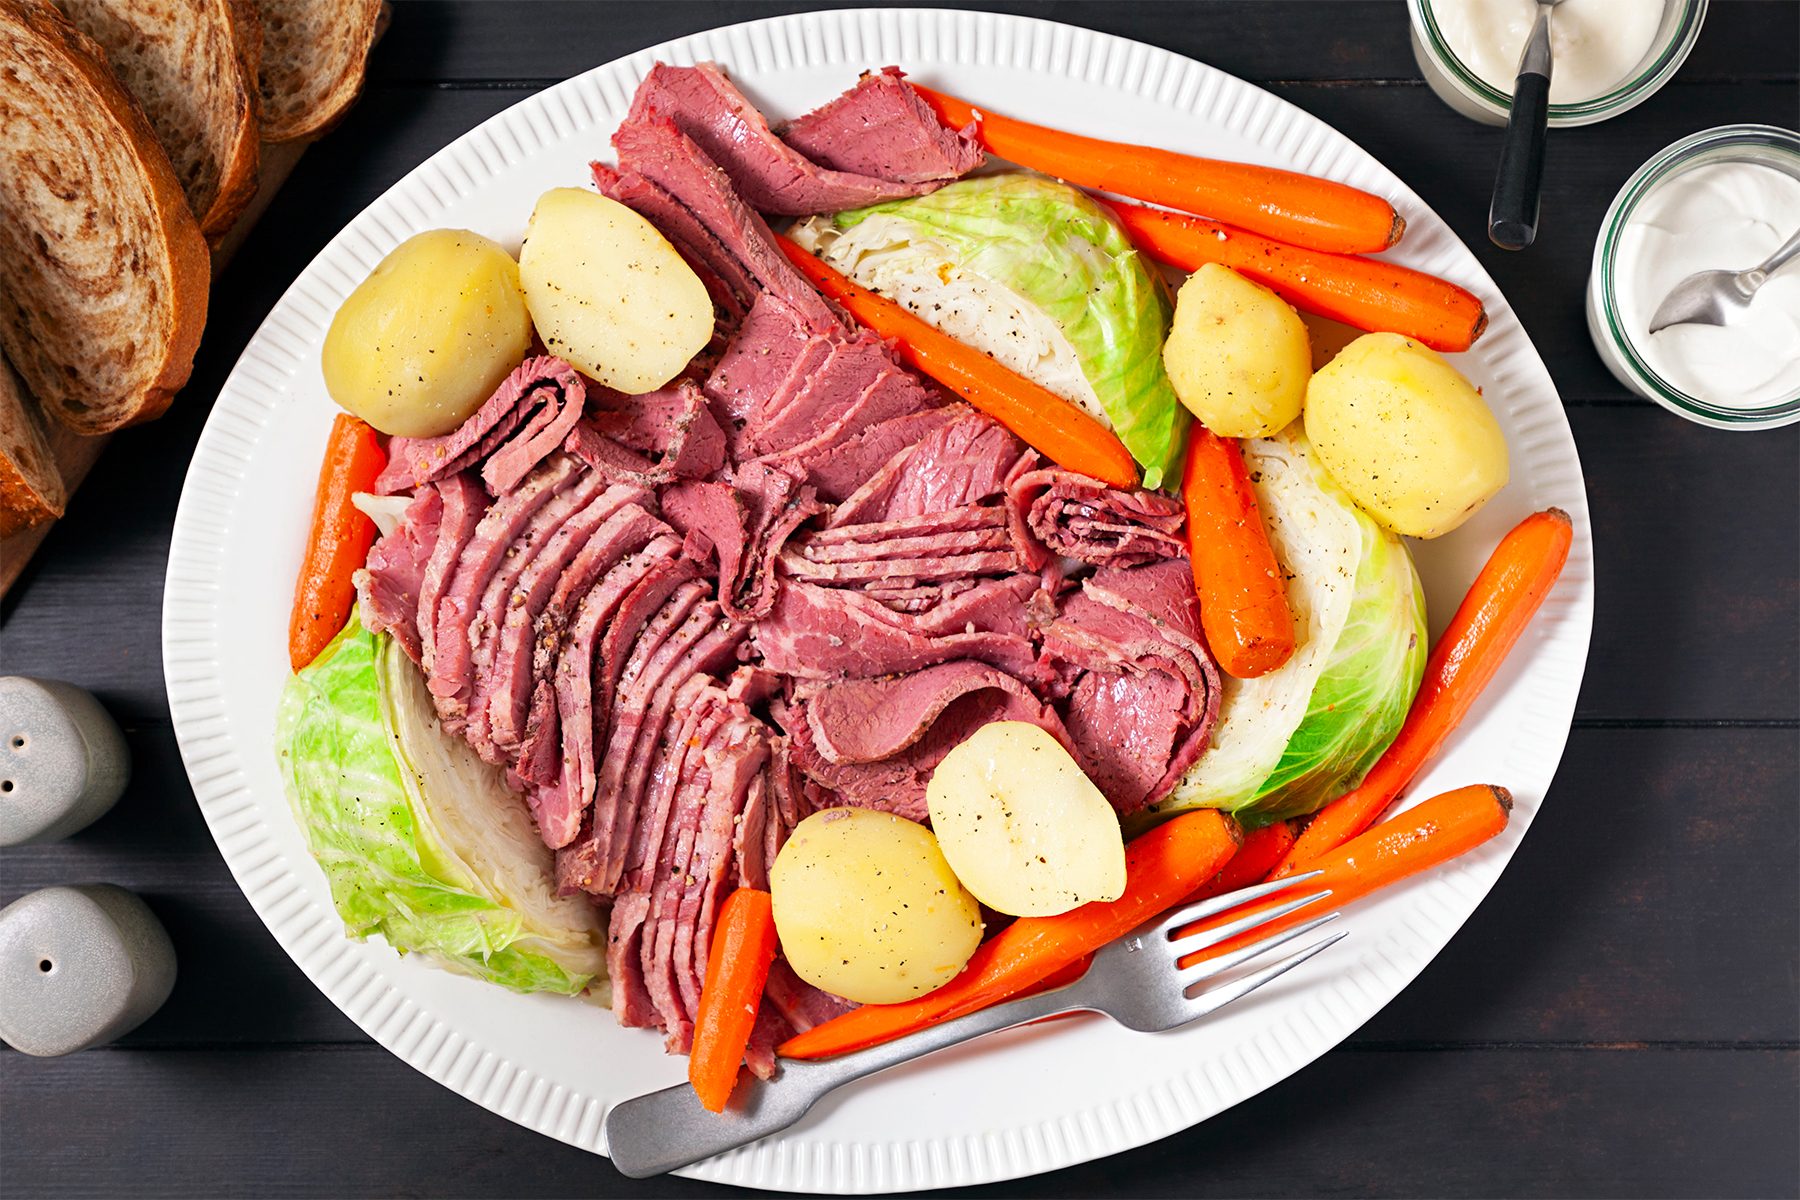 Served Corned Beef And Cabbage